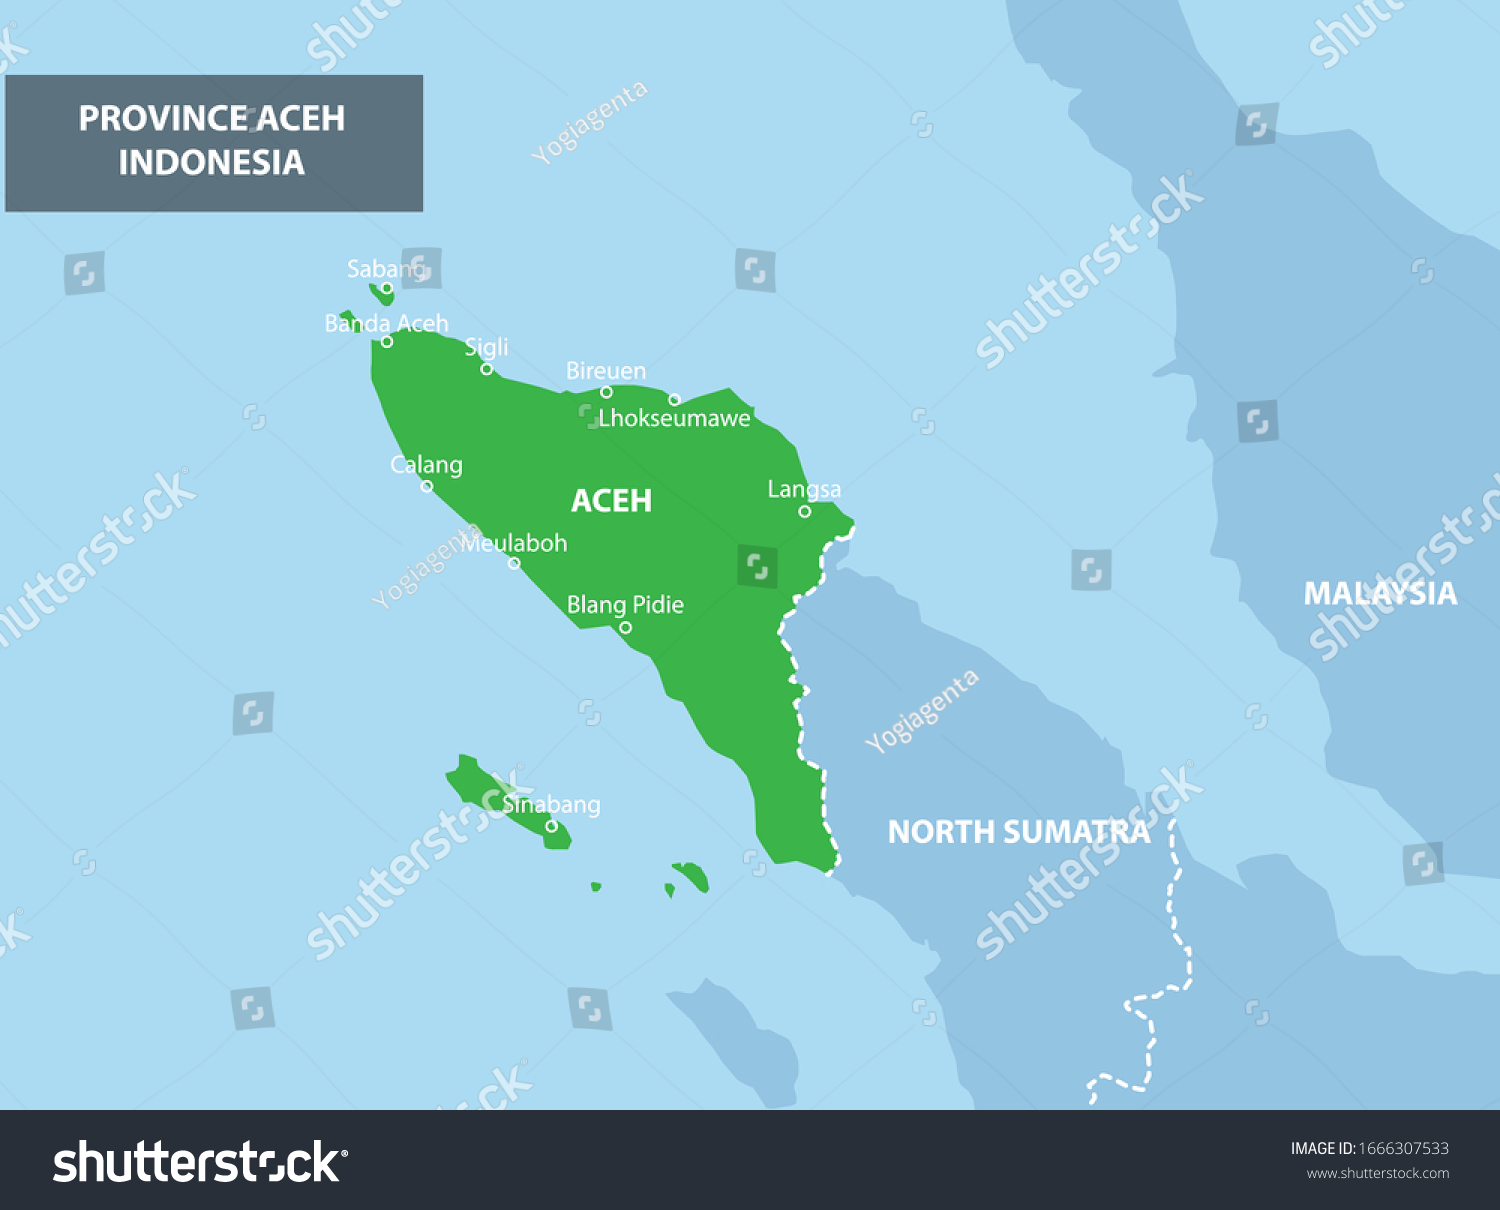 SVG of Province of Aceh Maps Indonesia Country svg